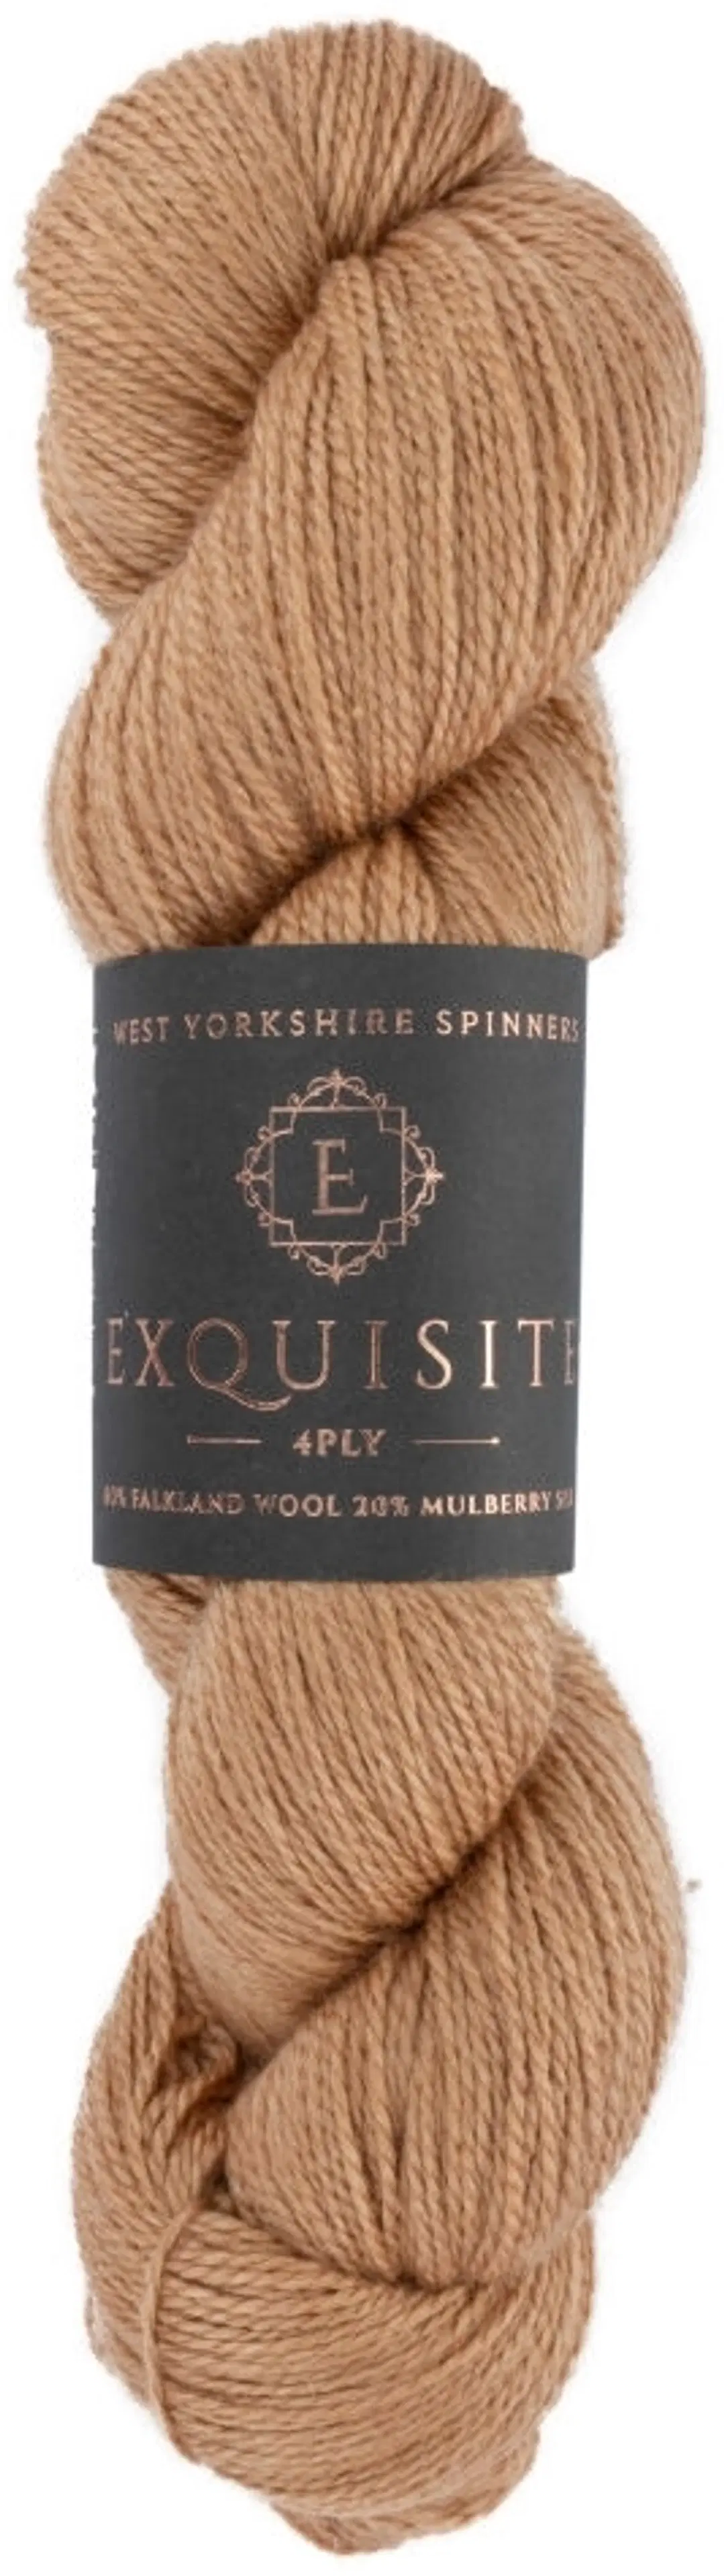 West Yorkshire Spinners lanka Exquisite 4PLY 100g Dusk 403